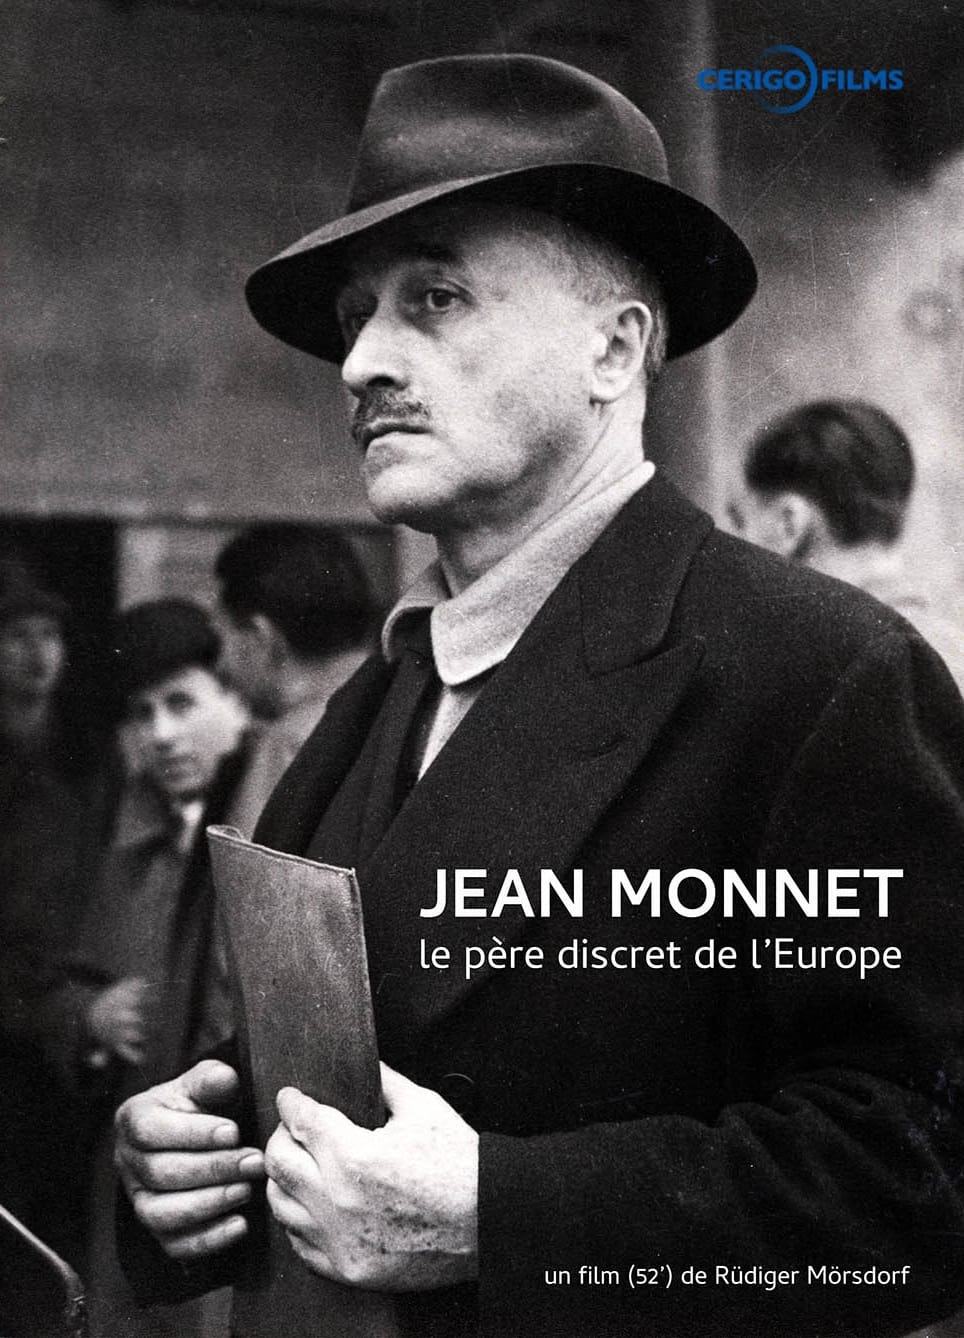 The Man in the Shadows: The Incredible Life of Jean Monnet